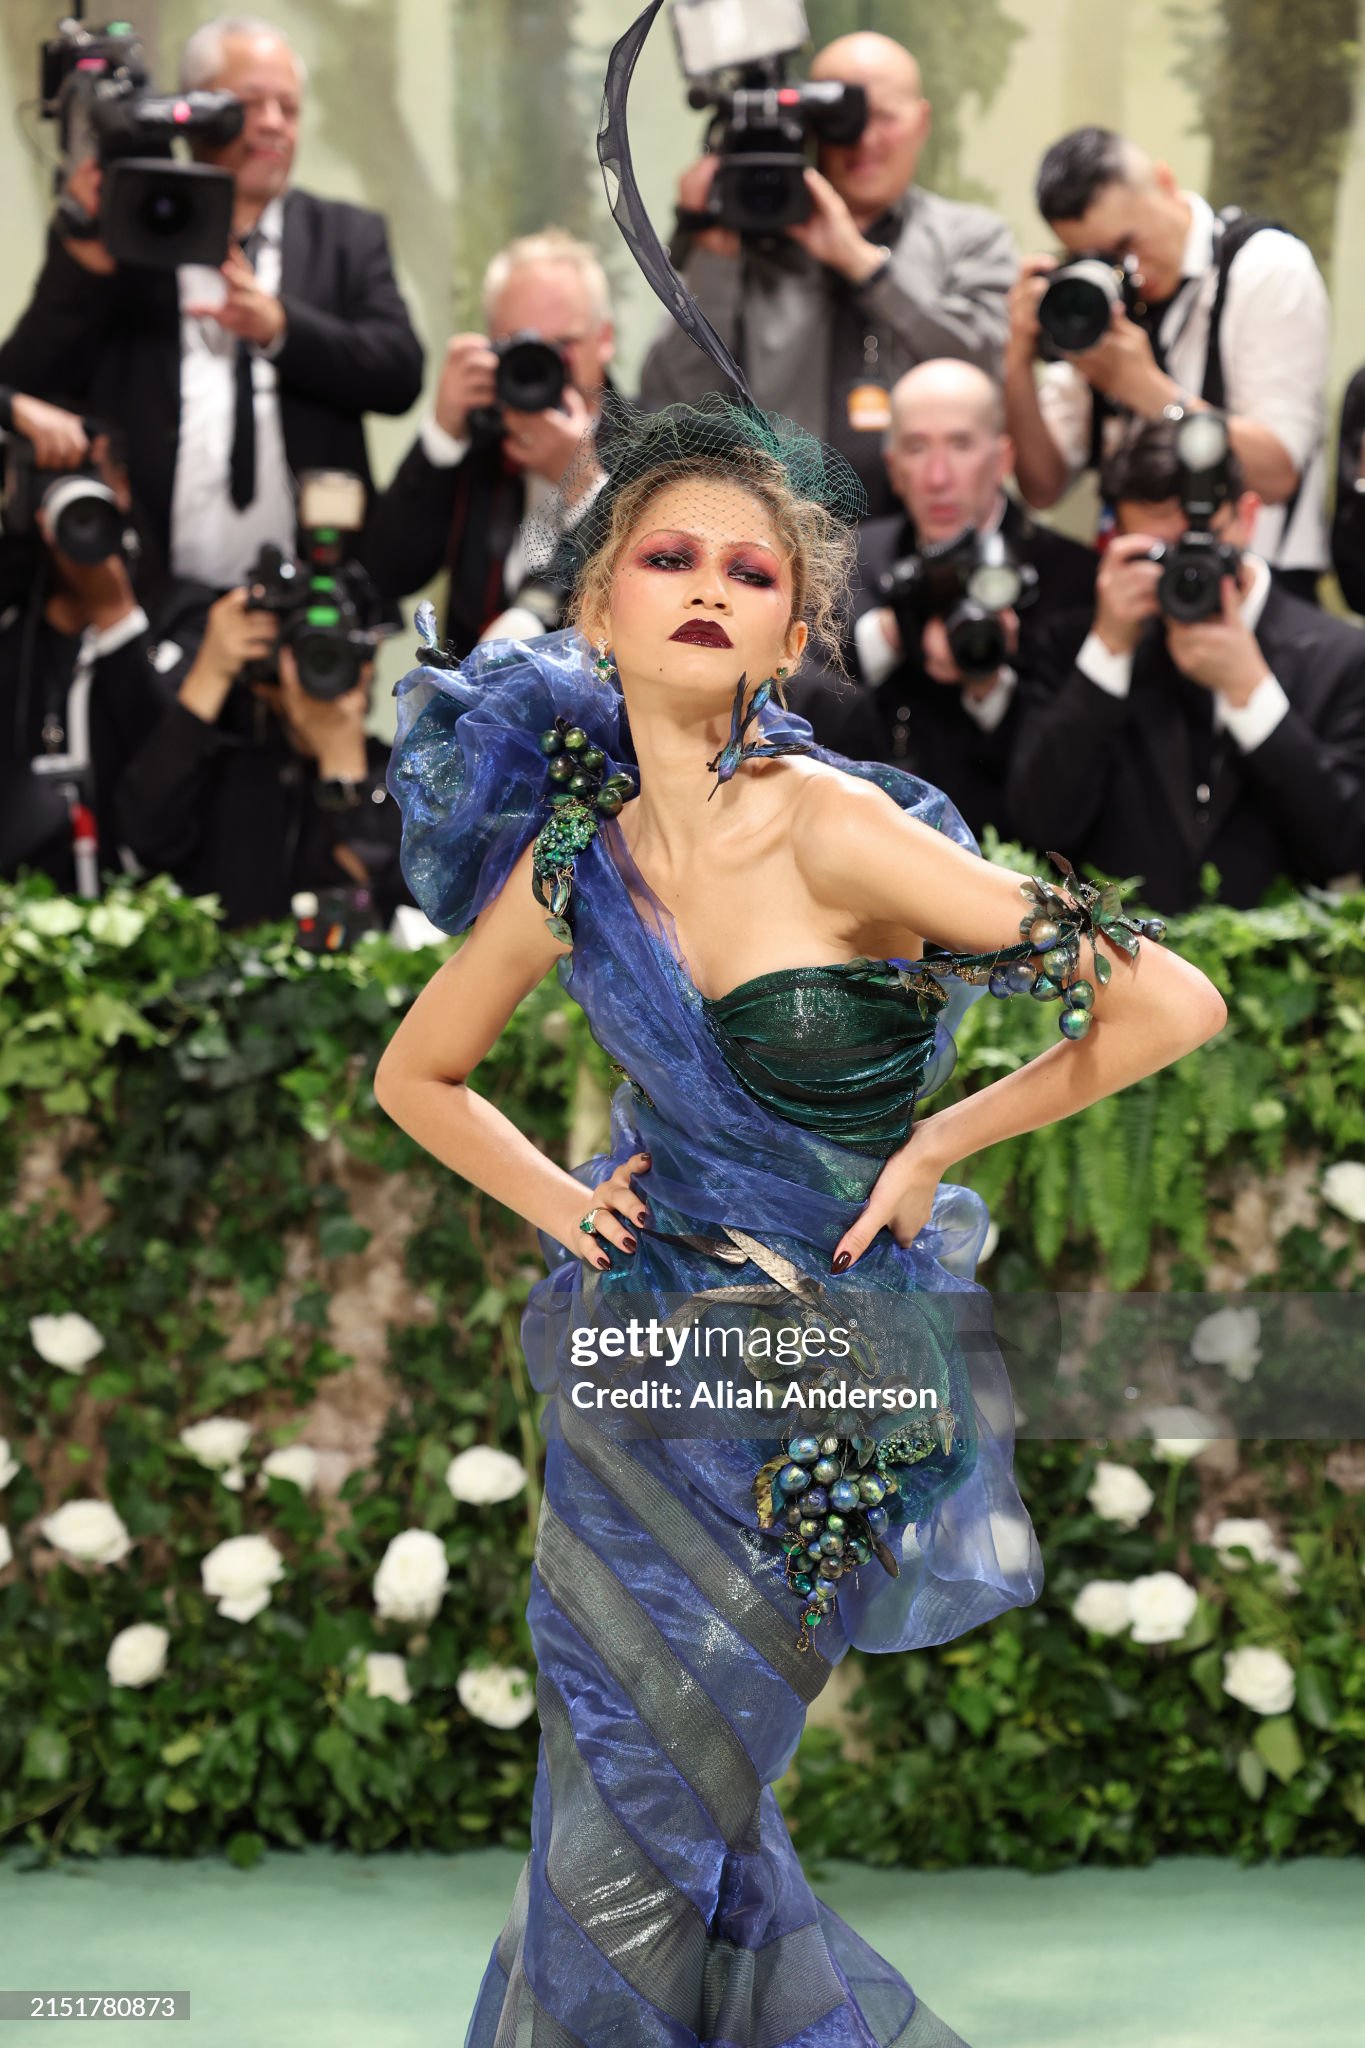 gettyimages-2151780873-2048x2048.jpg